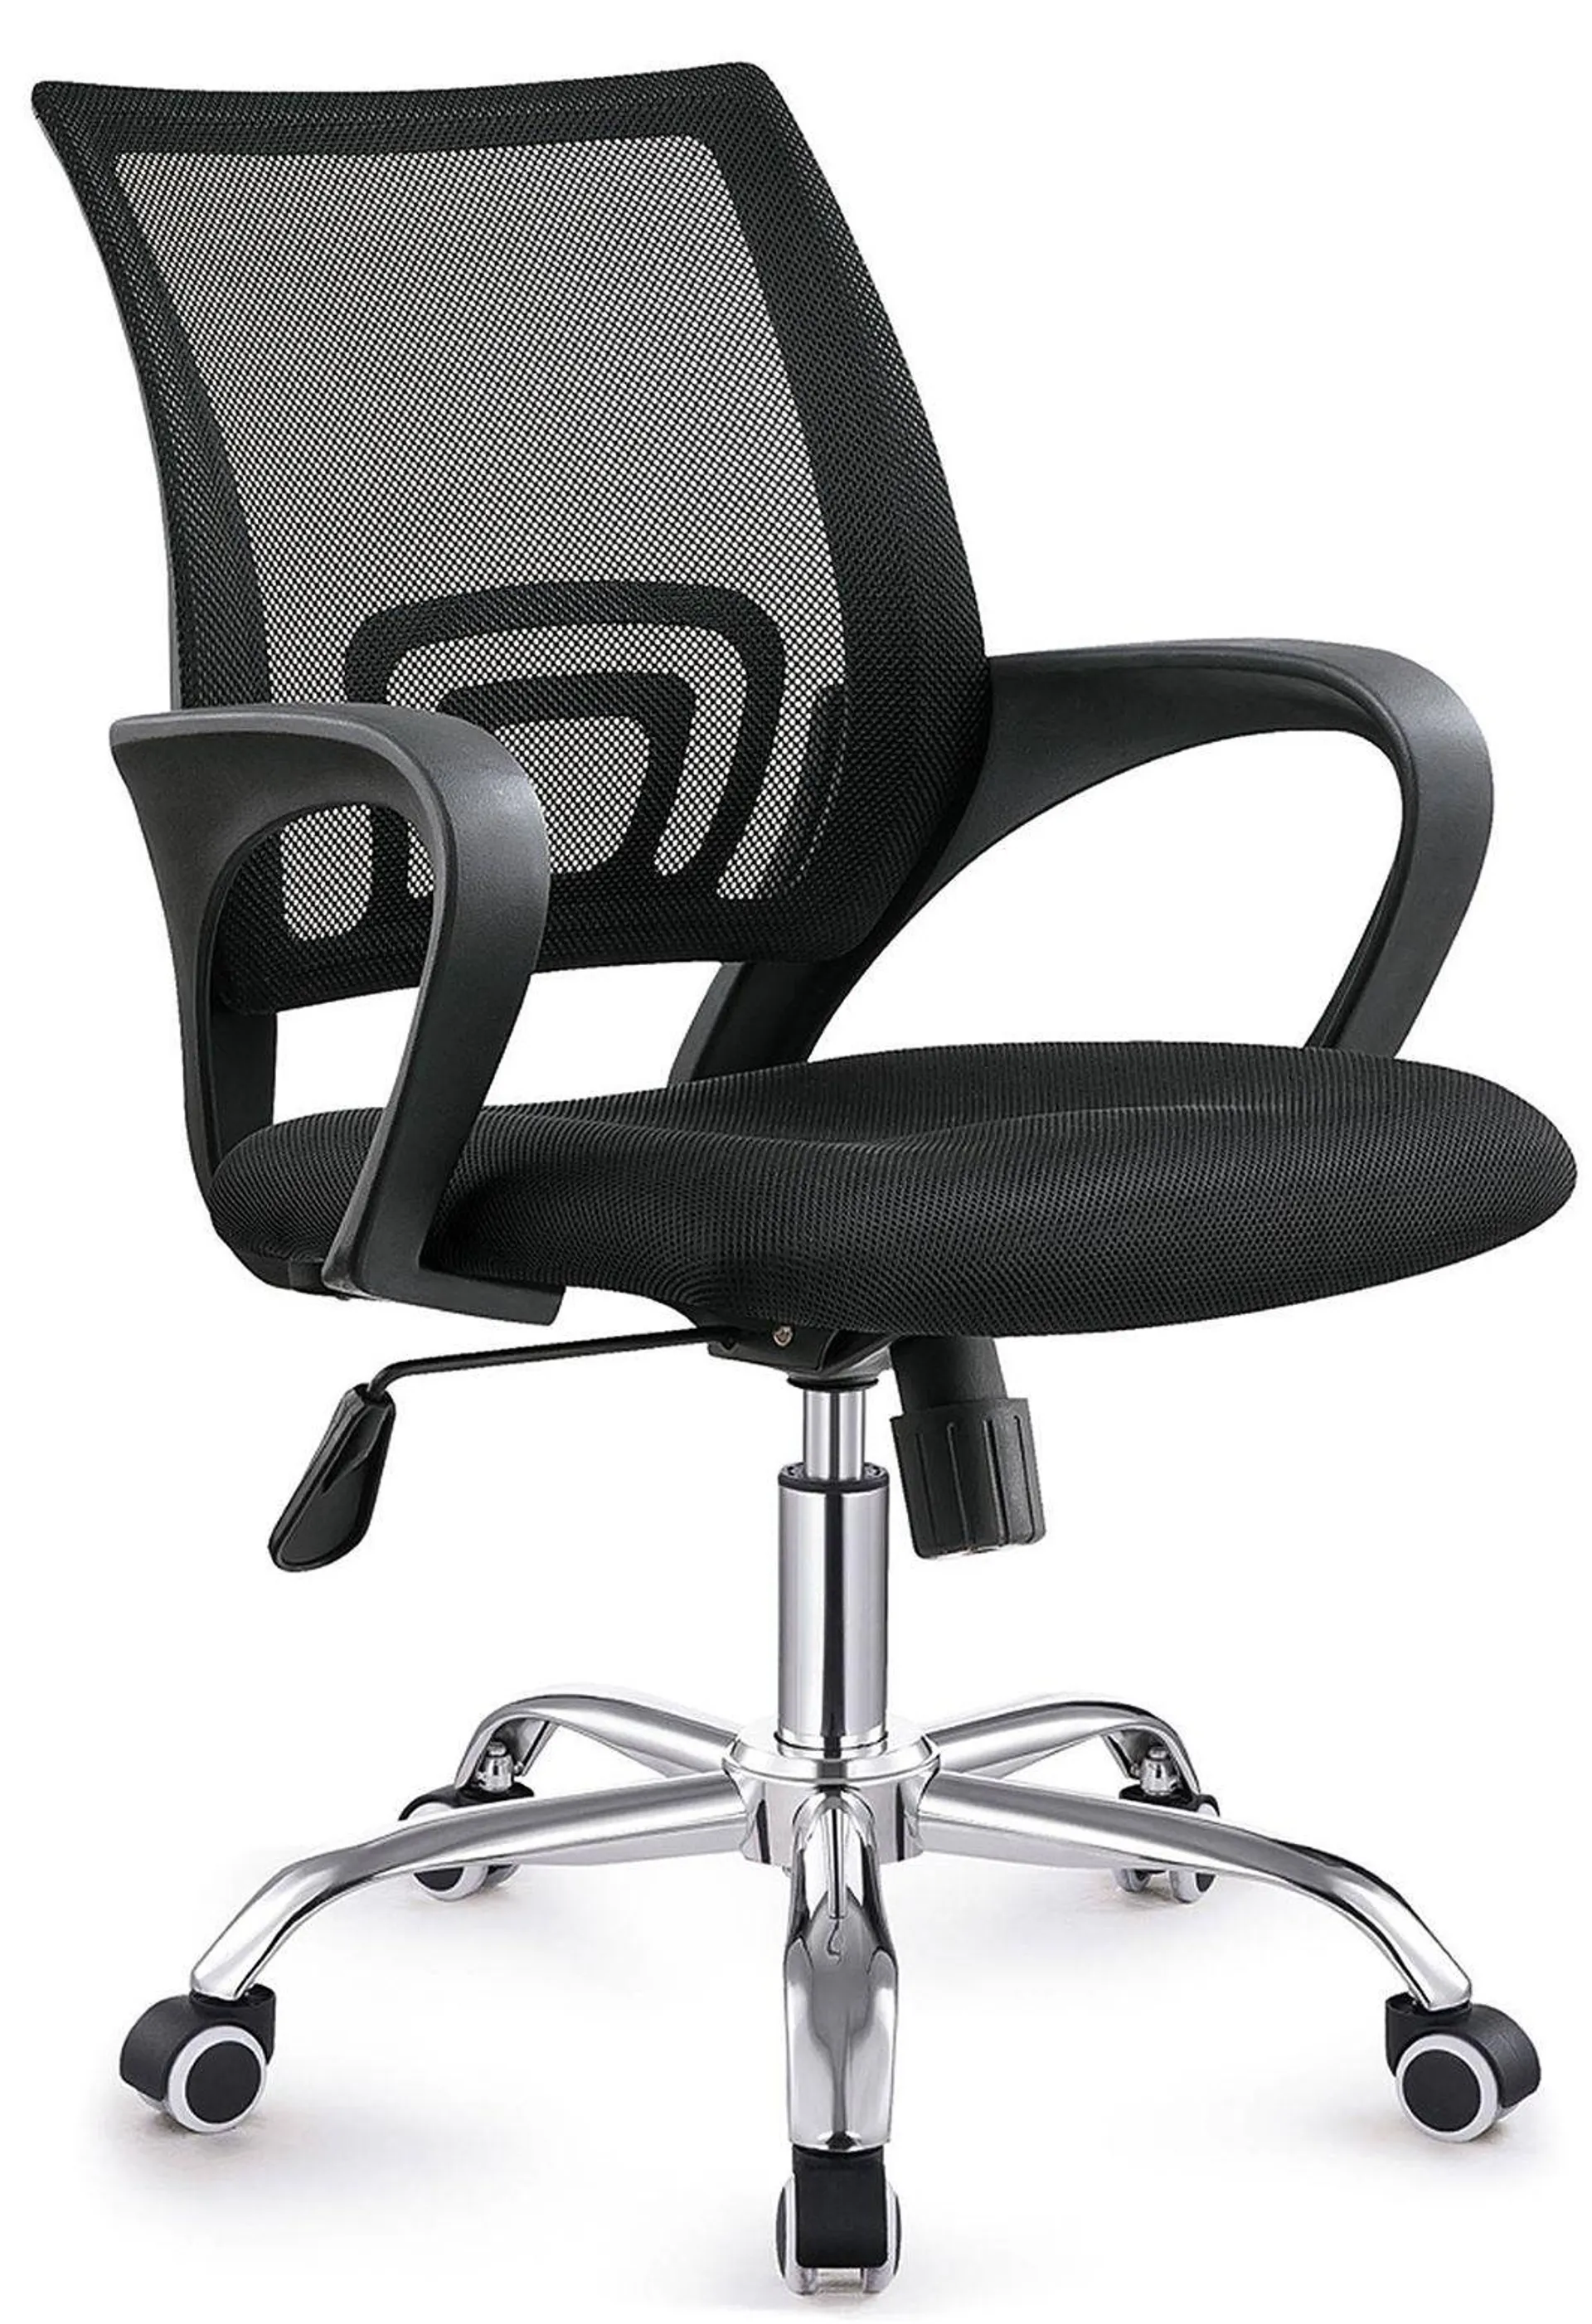 TOCC Zippy Netting Back Typist Office Chair with Chrome Base - Black